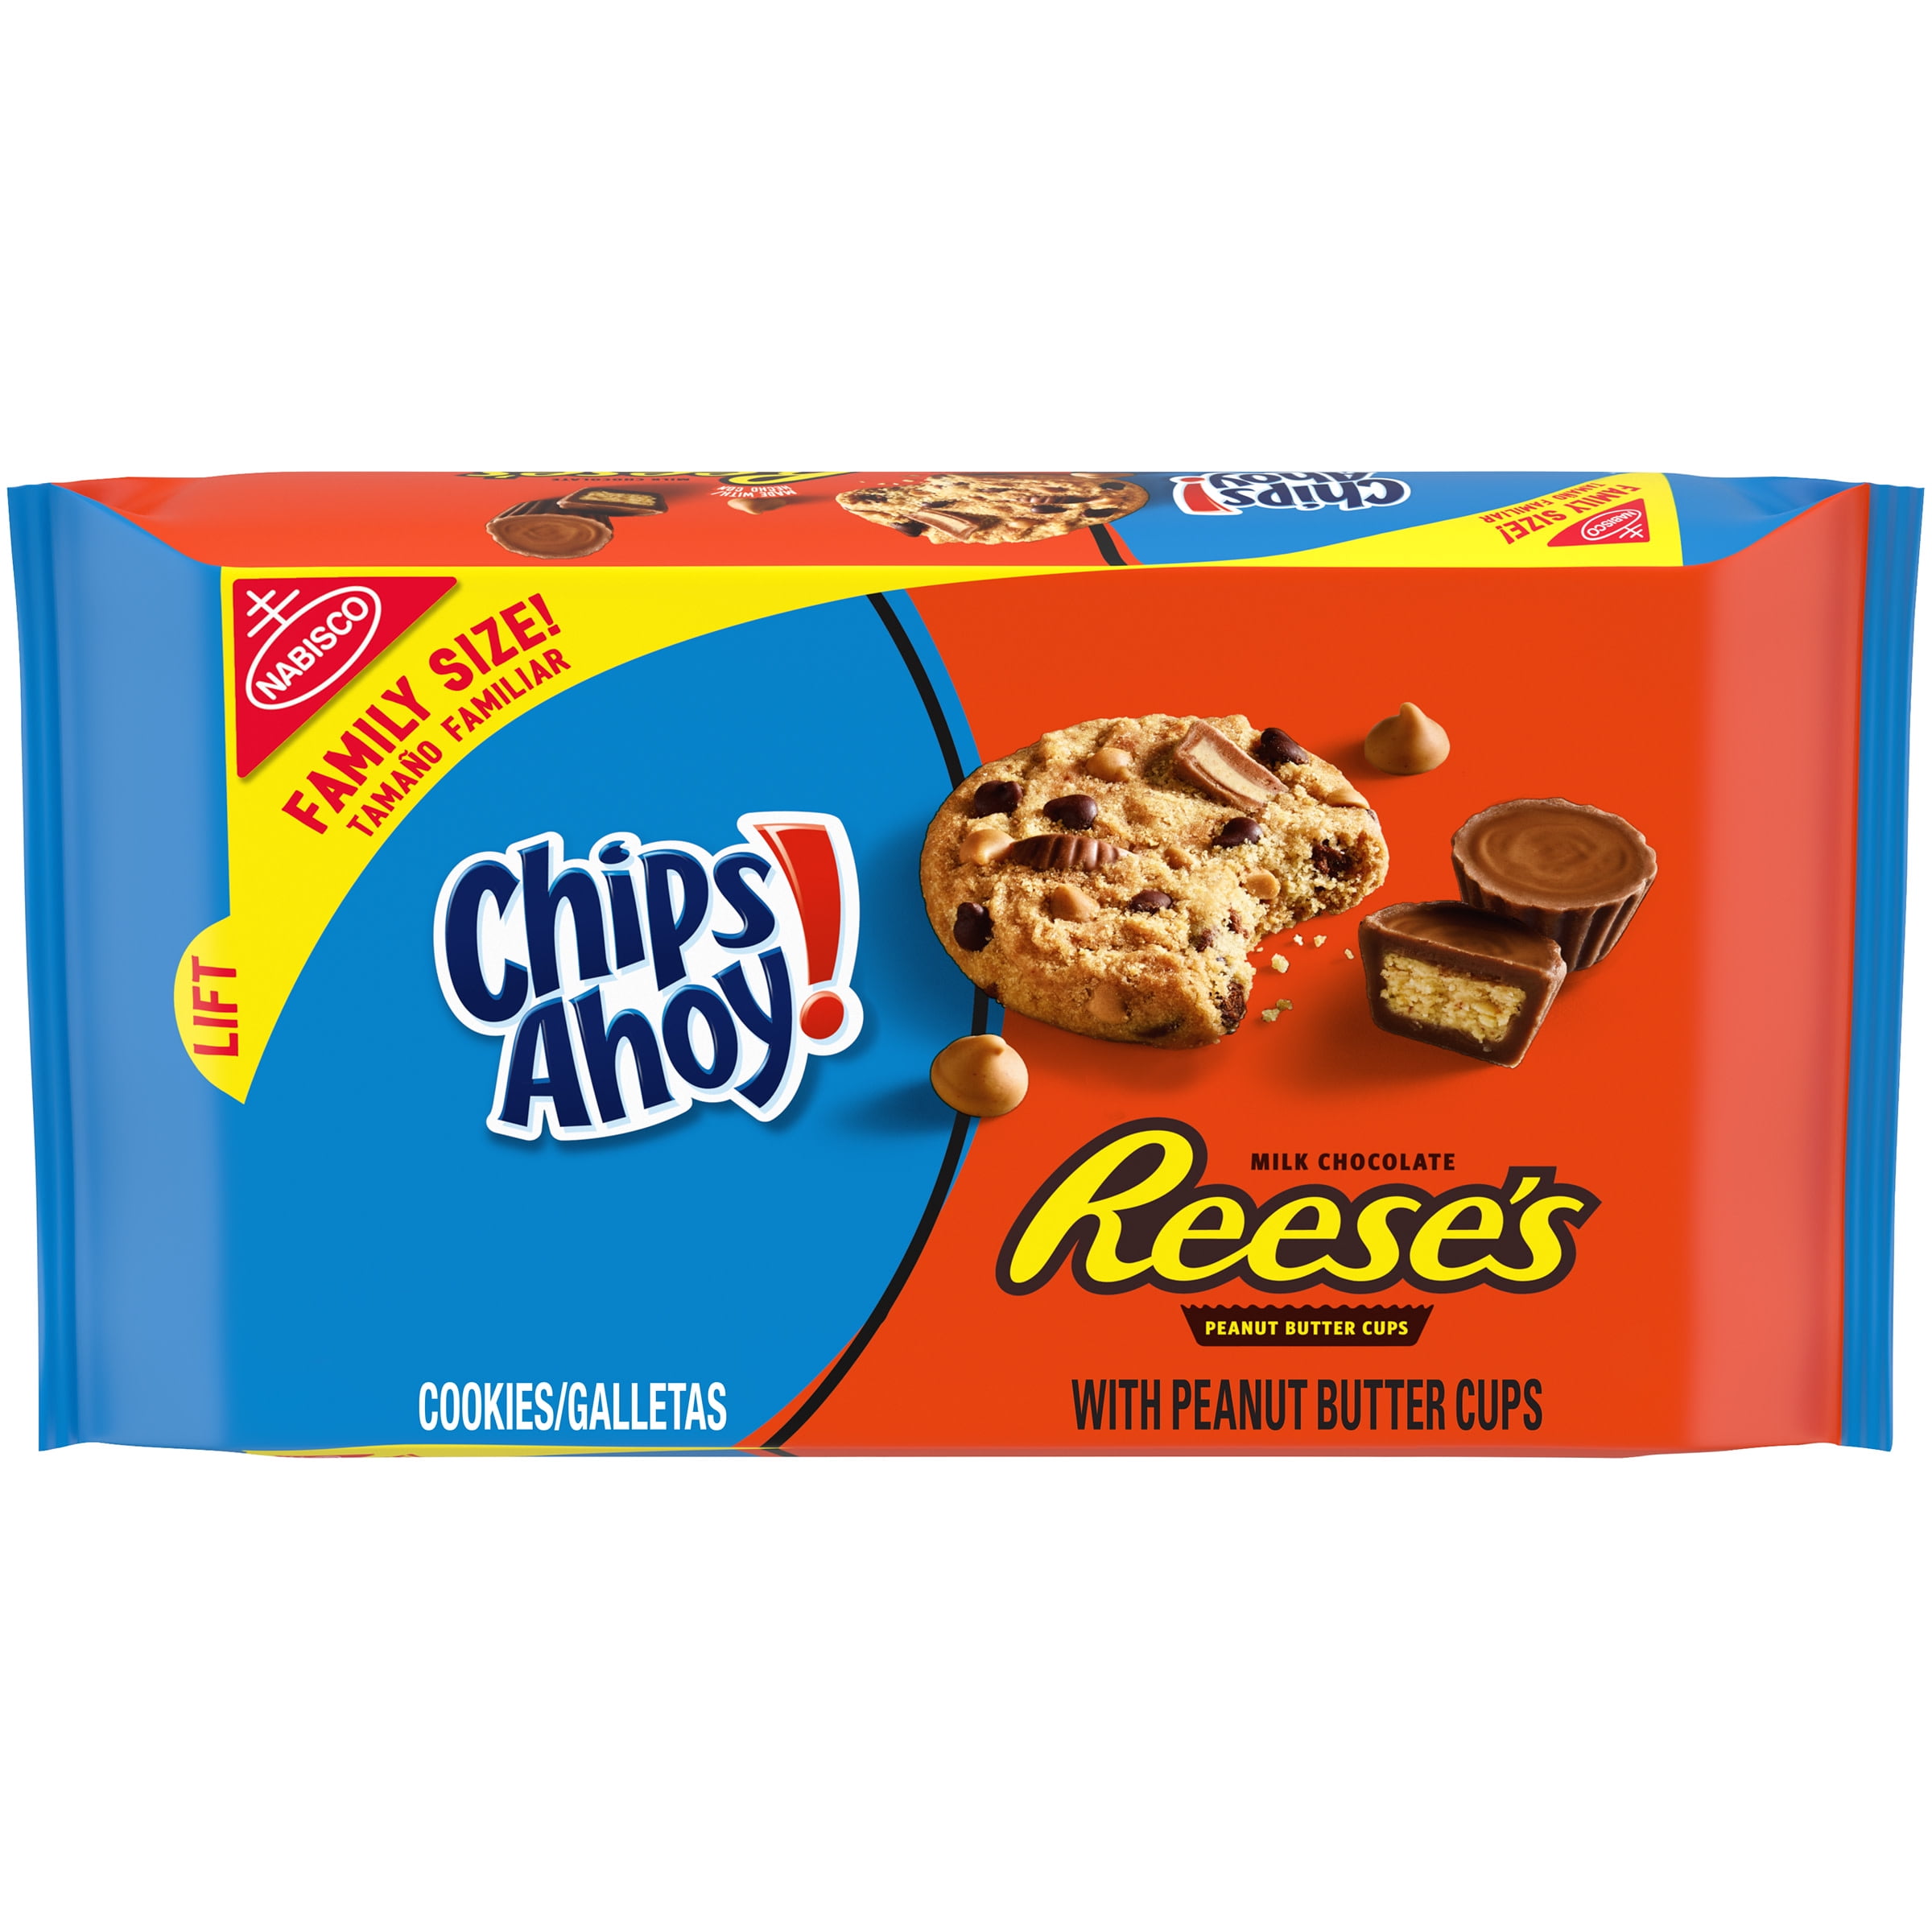 CHIPS AHOY! Cookies with Reeses Peanut Butter Cups, Family Size, 14.25 oz